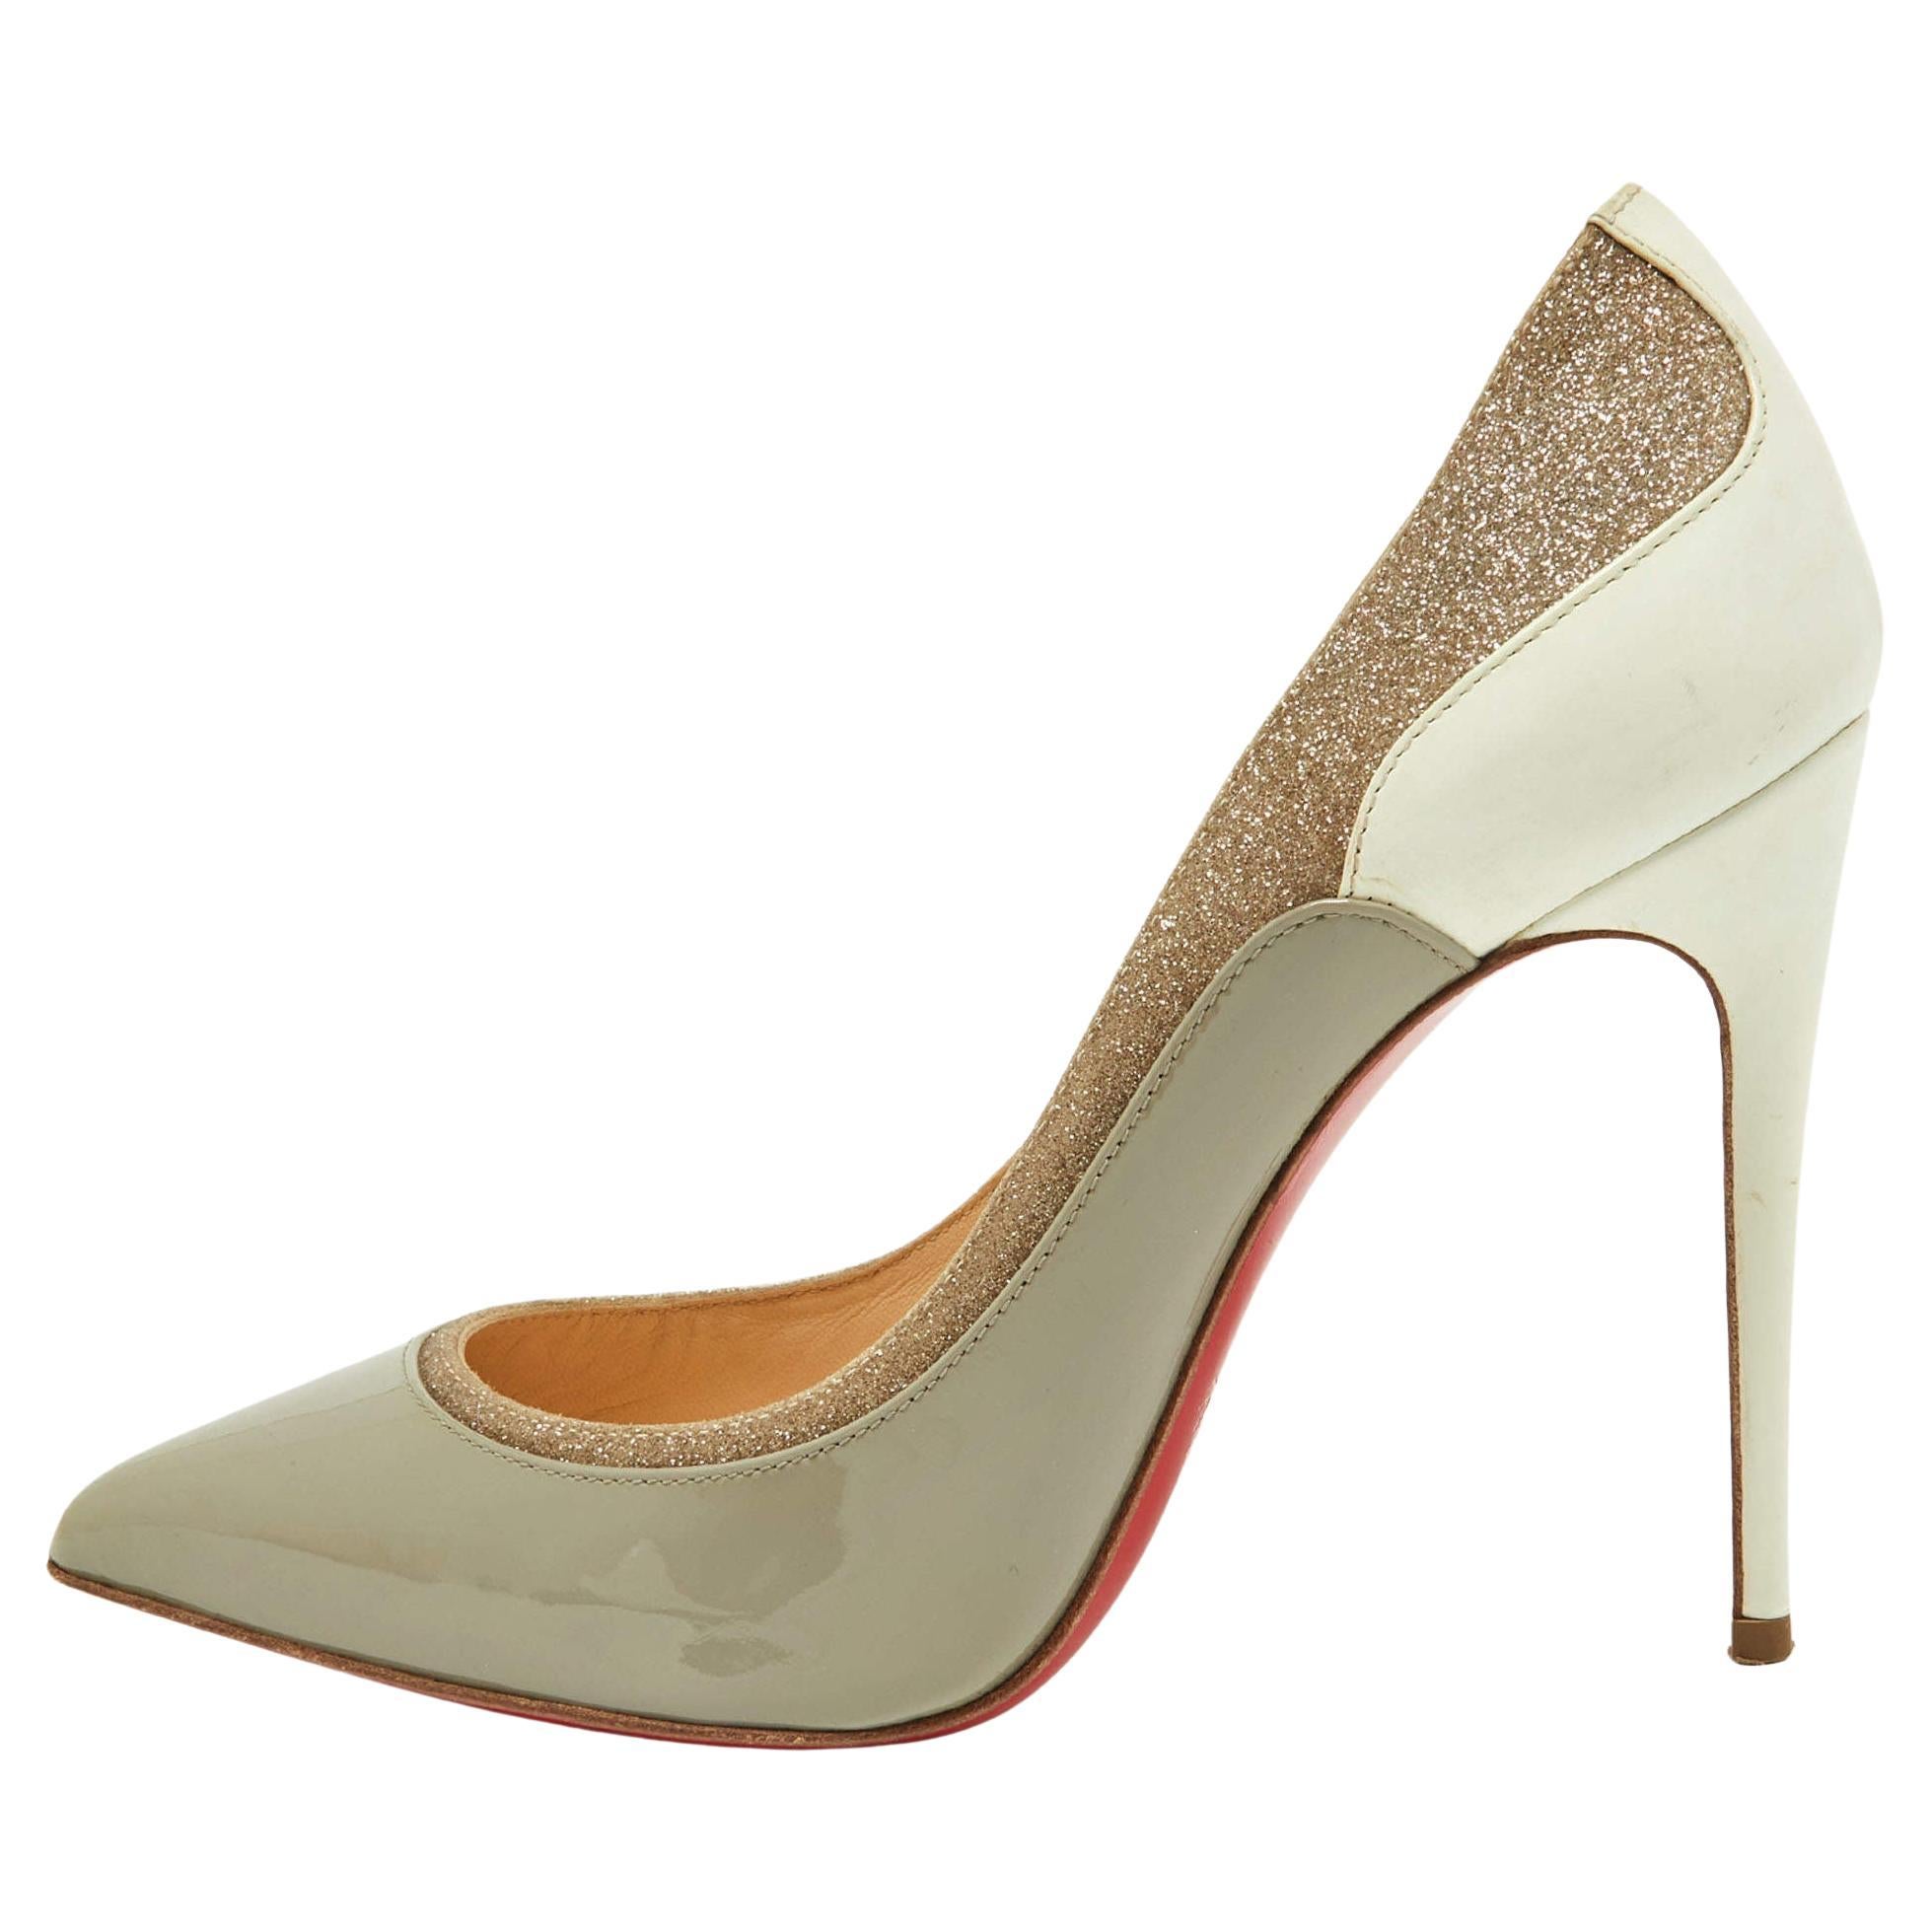 Christian Louboutin Tri-Color Patent Leather and Glitter Tucsick Pumps Size 35.5 For Sale